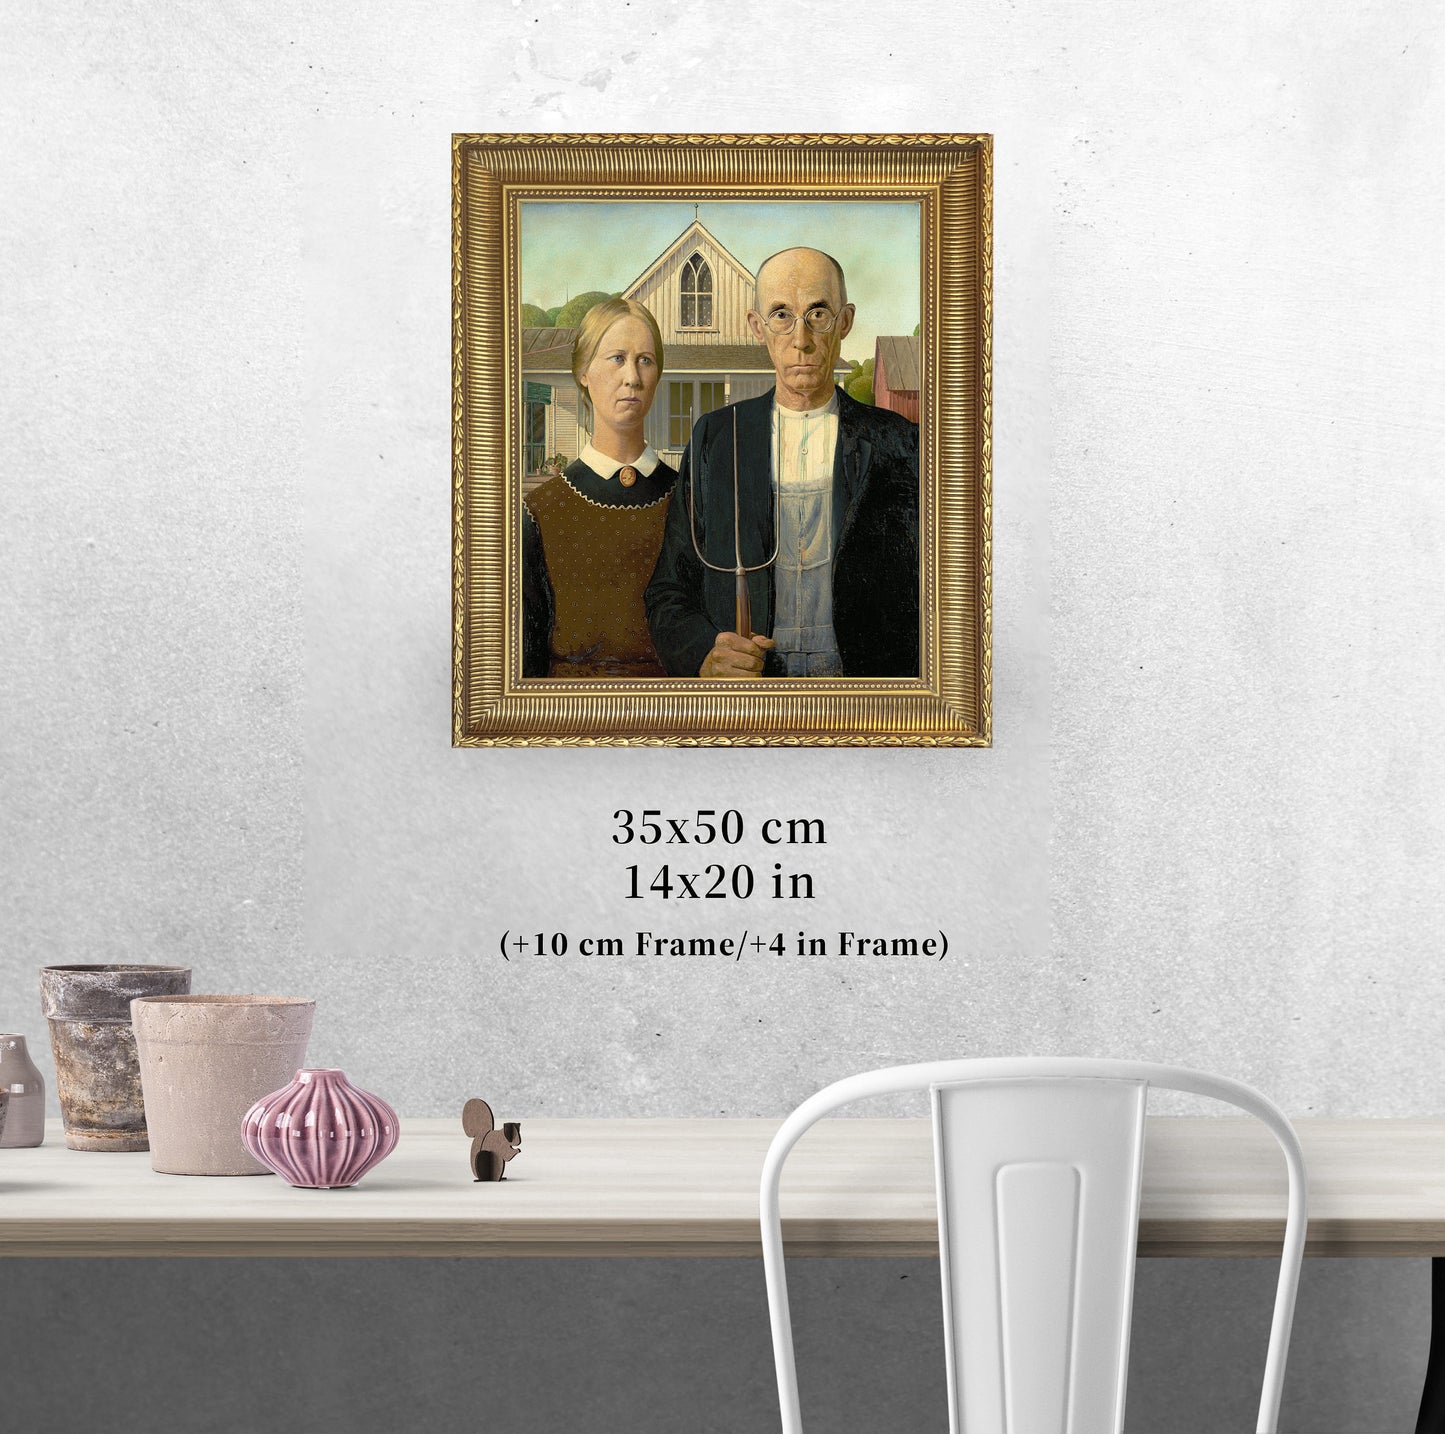 American Gothic by Grant Wood, 3d Printed with texture and brush strokes looks like original oil-painting, code:030